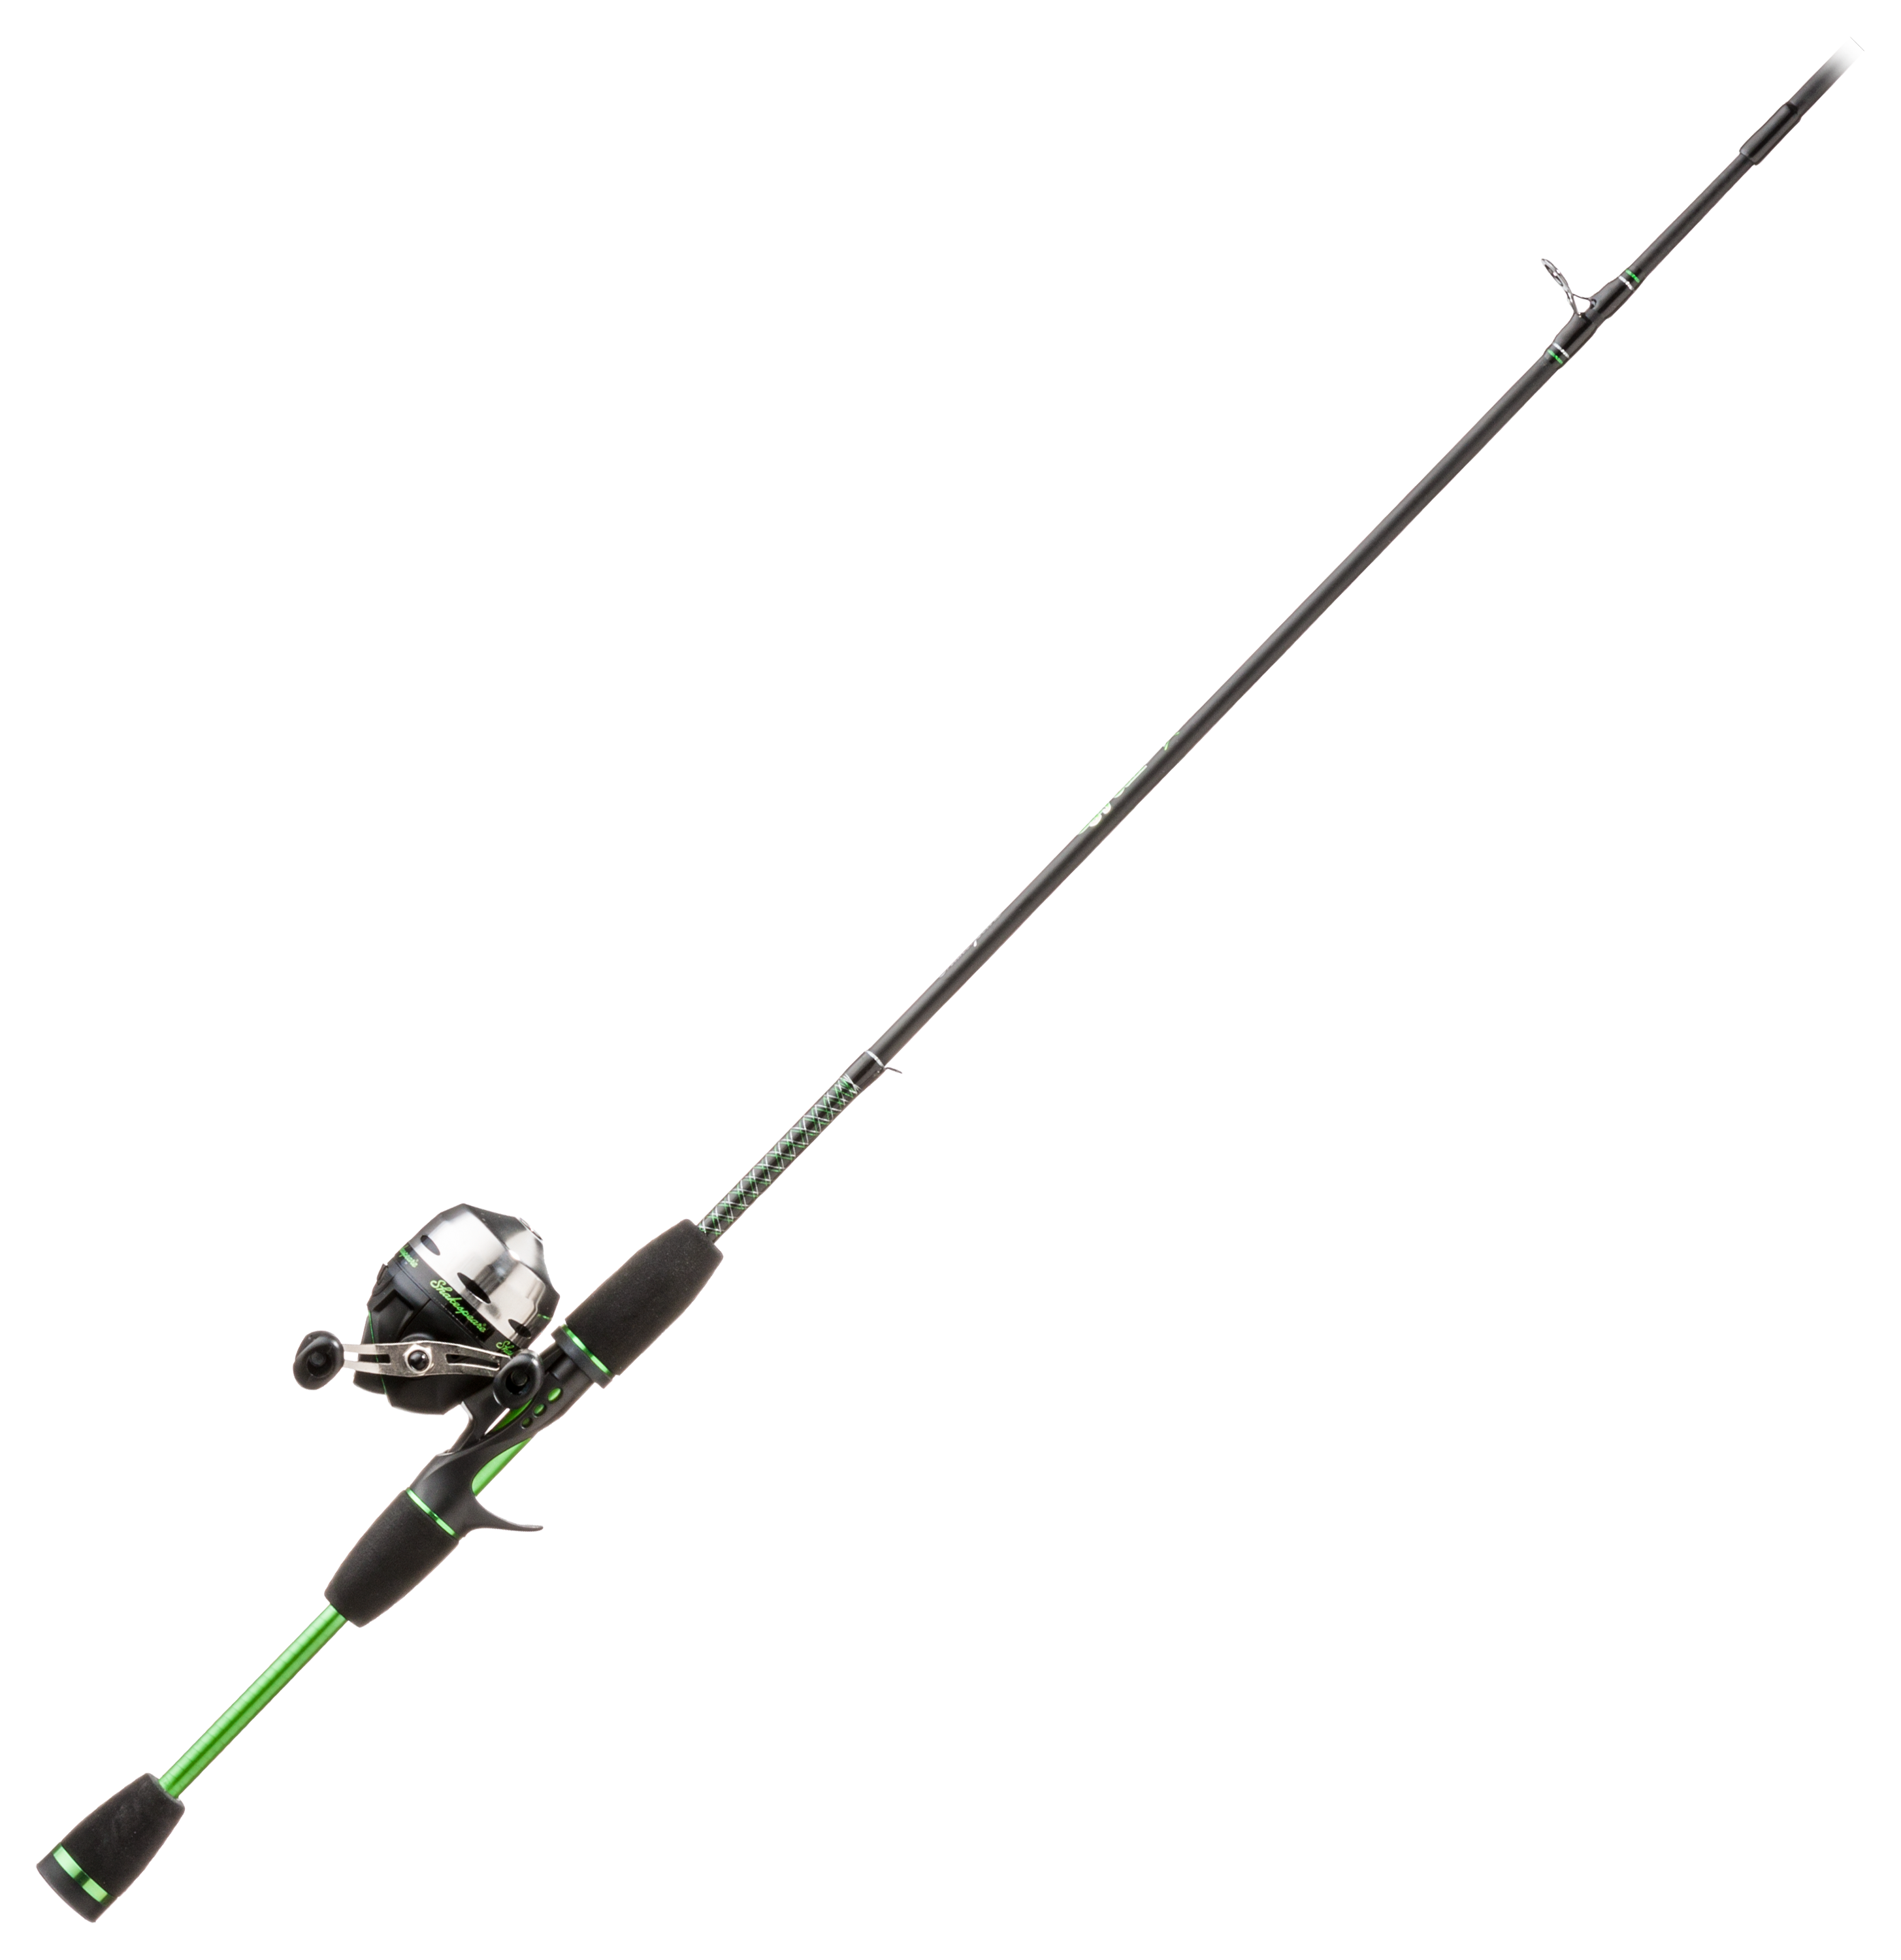 Spin Cast Rod and Reel Combos - Go Salmon Fishing